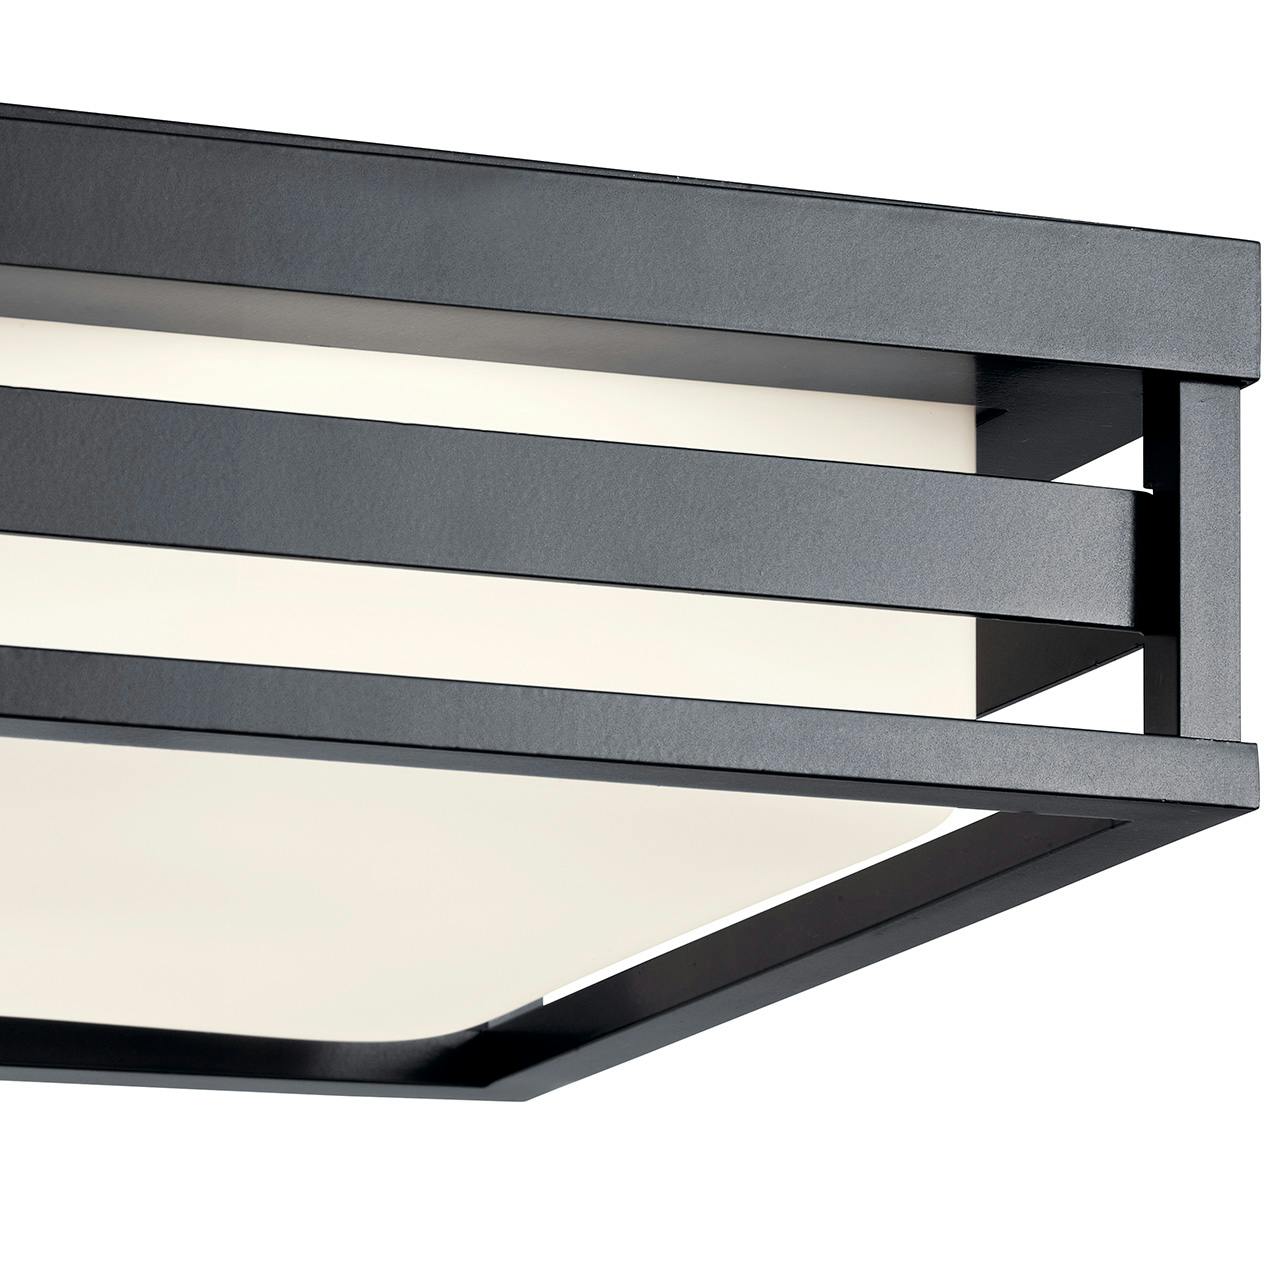 Close up view of the Ryler LED 3000K 12" Ceiling Light Black on a white background